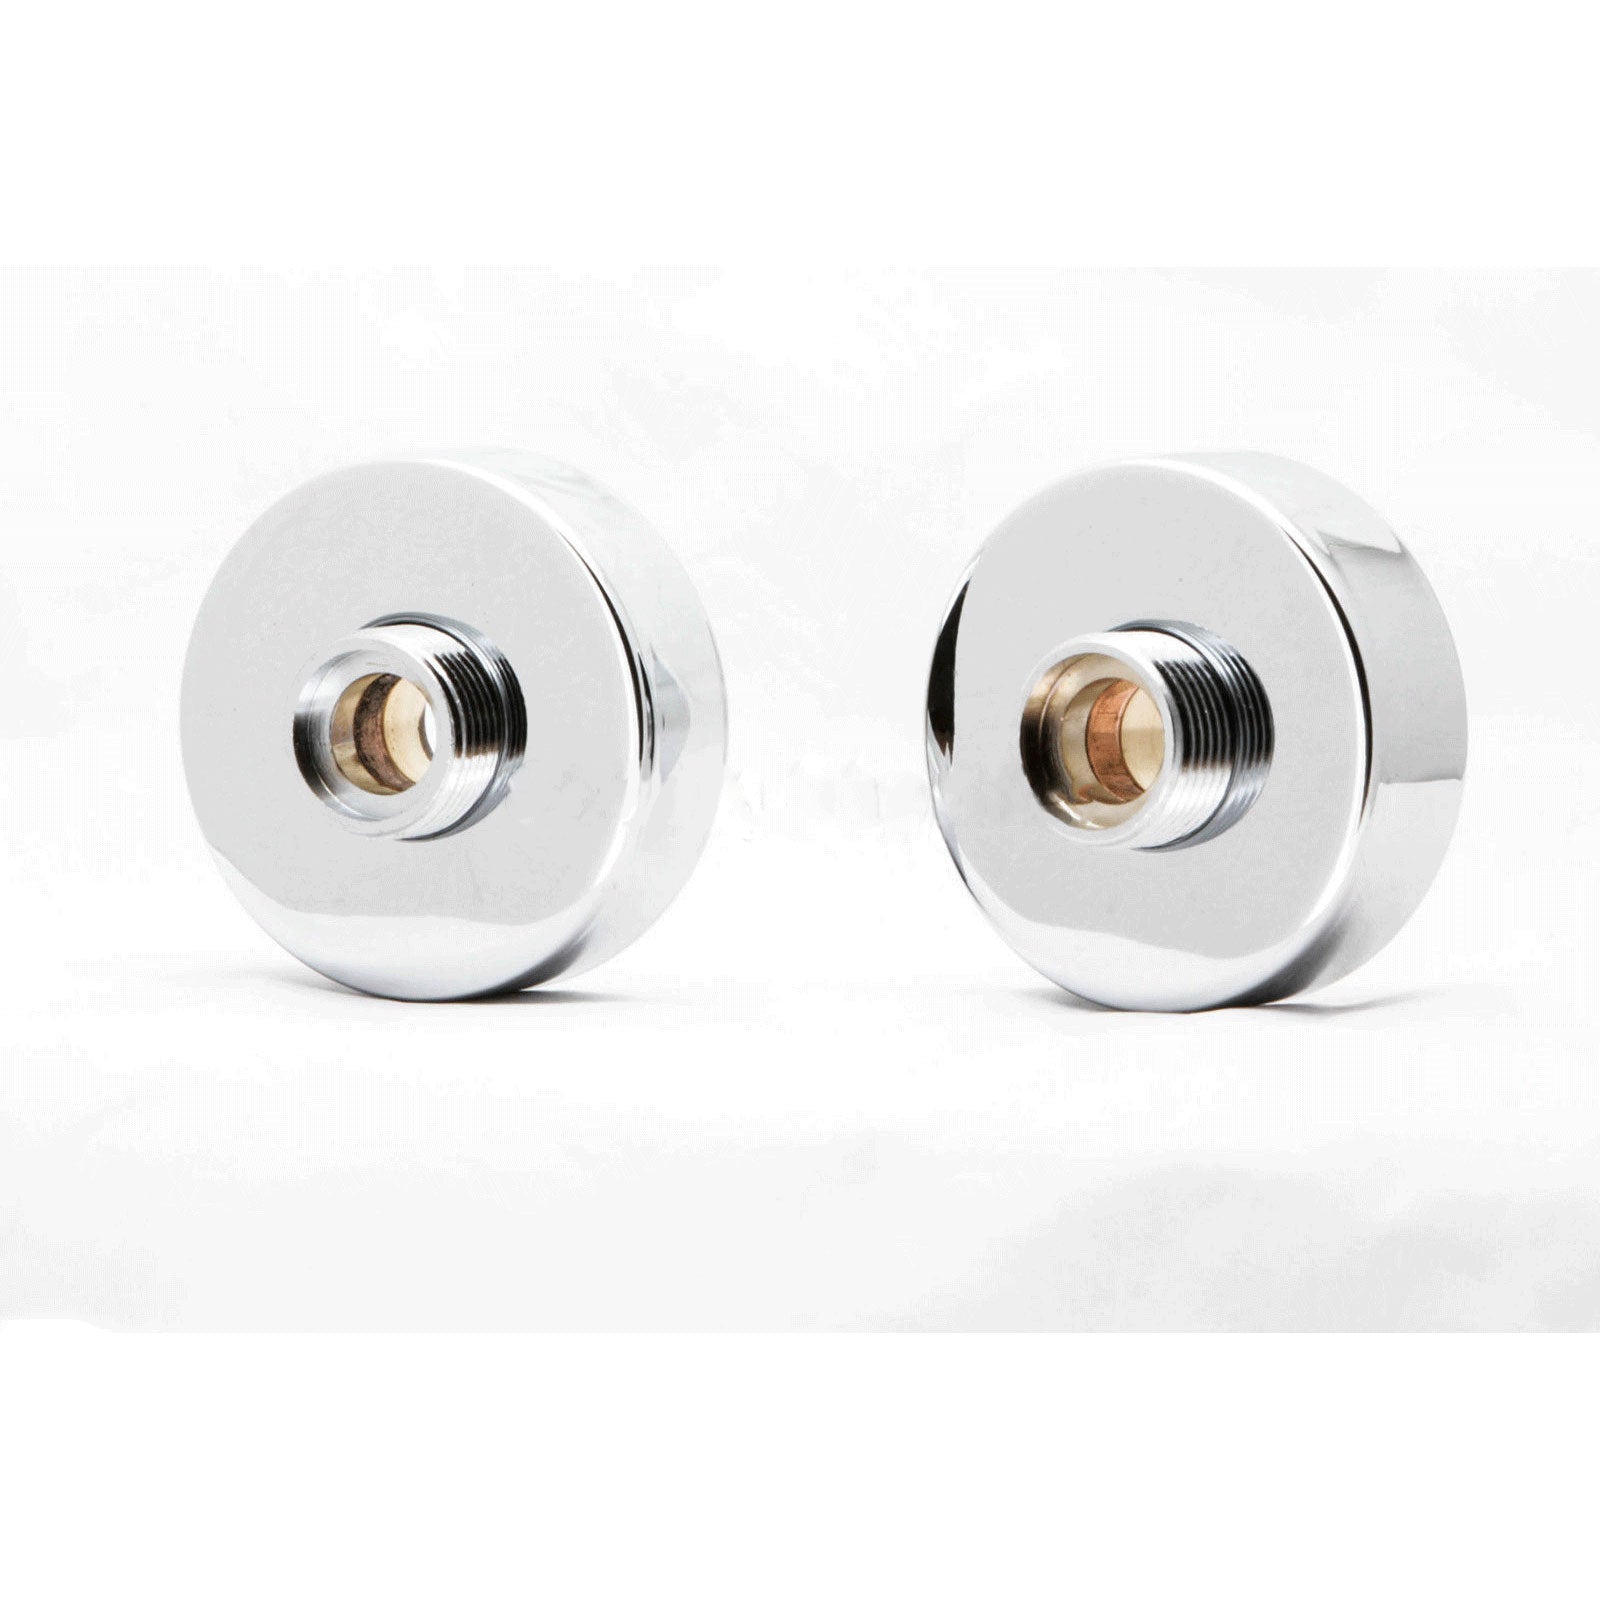 Concealing Round Universal Shower S-Union Fittings